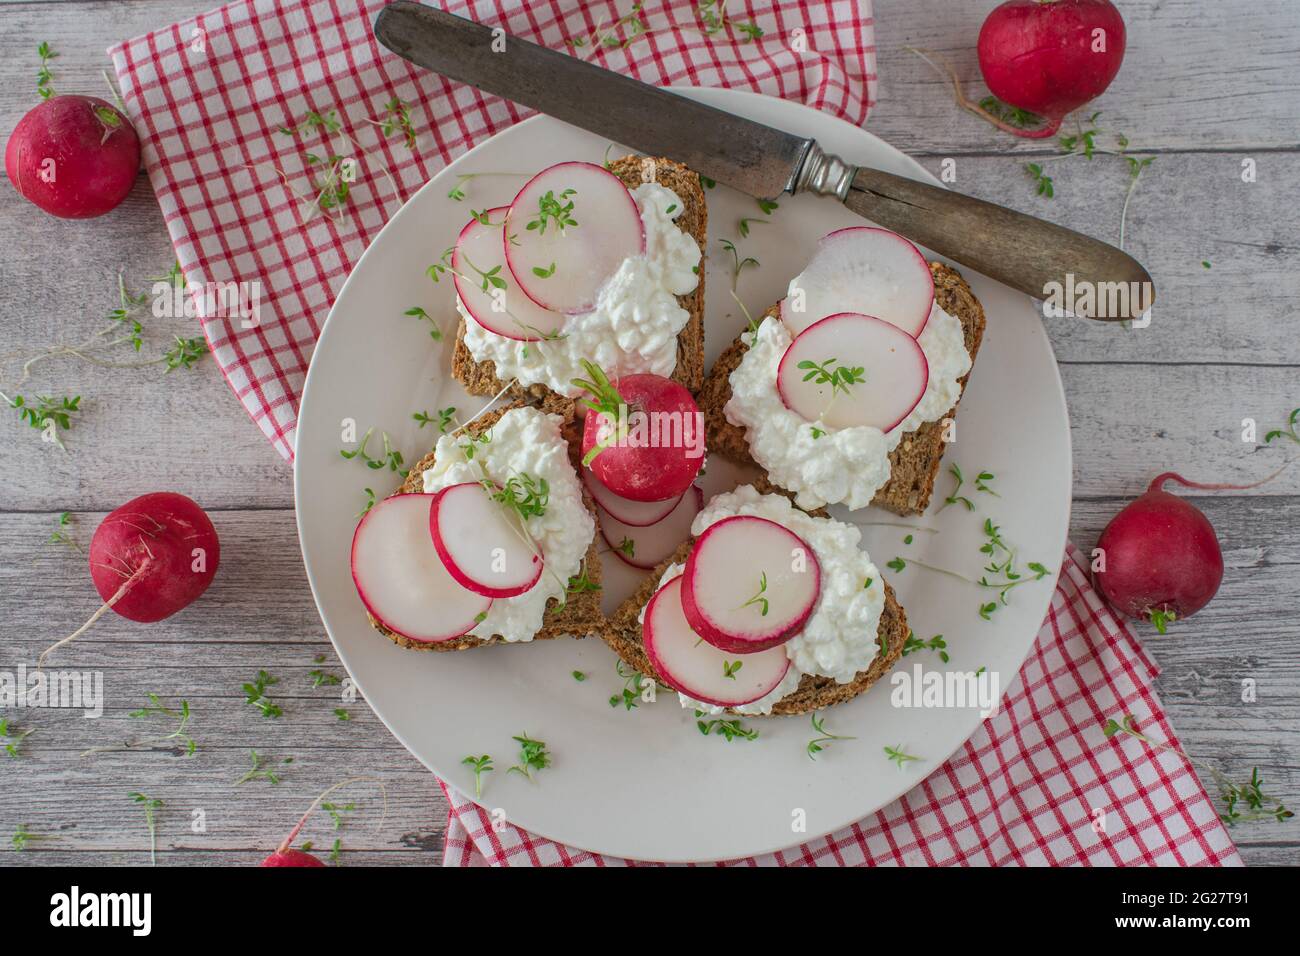 Healthy whole grain sandwiches with low fat cottage cheese, red radish and cress served on a plate on rustic and wooden table background Stock Photo